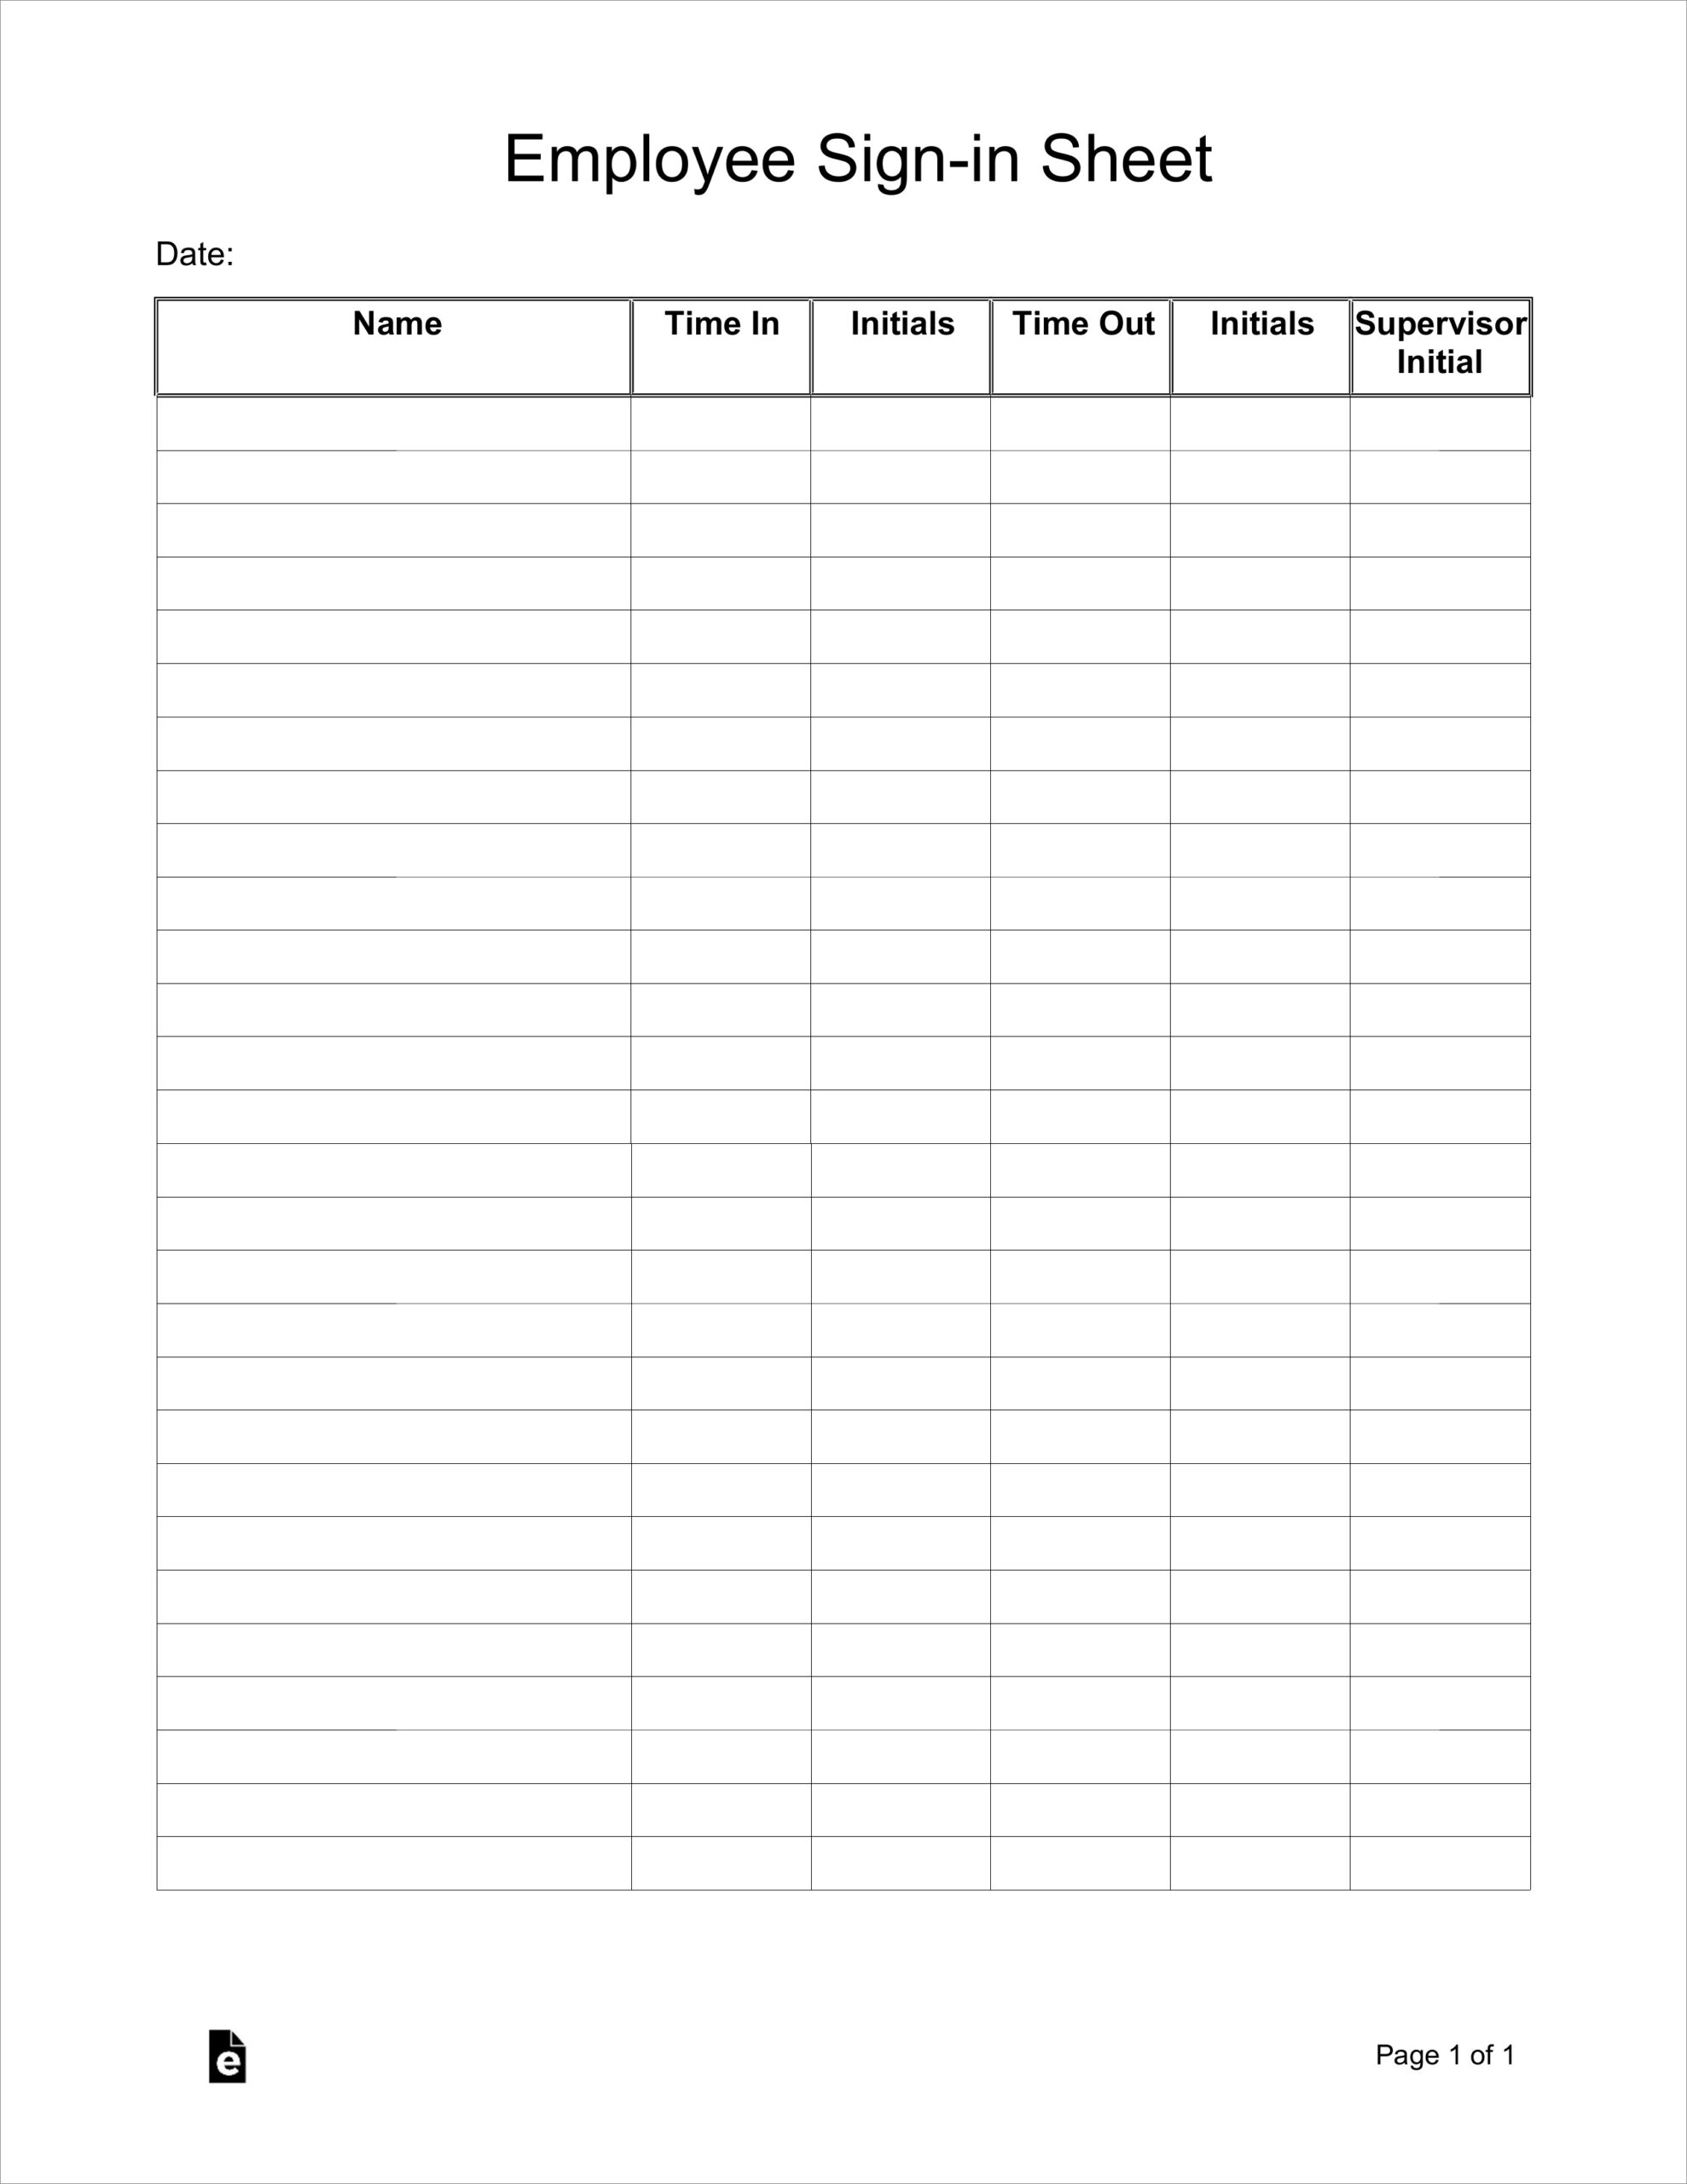 employee sign-in sheet template sample